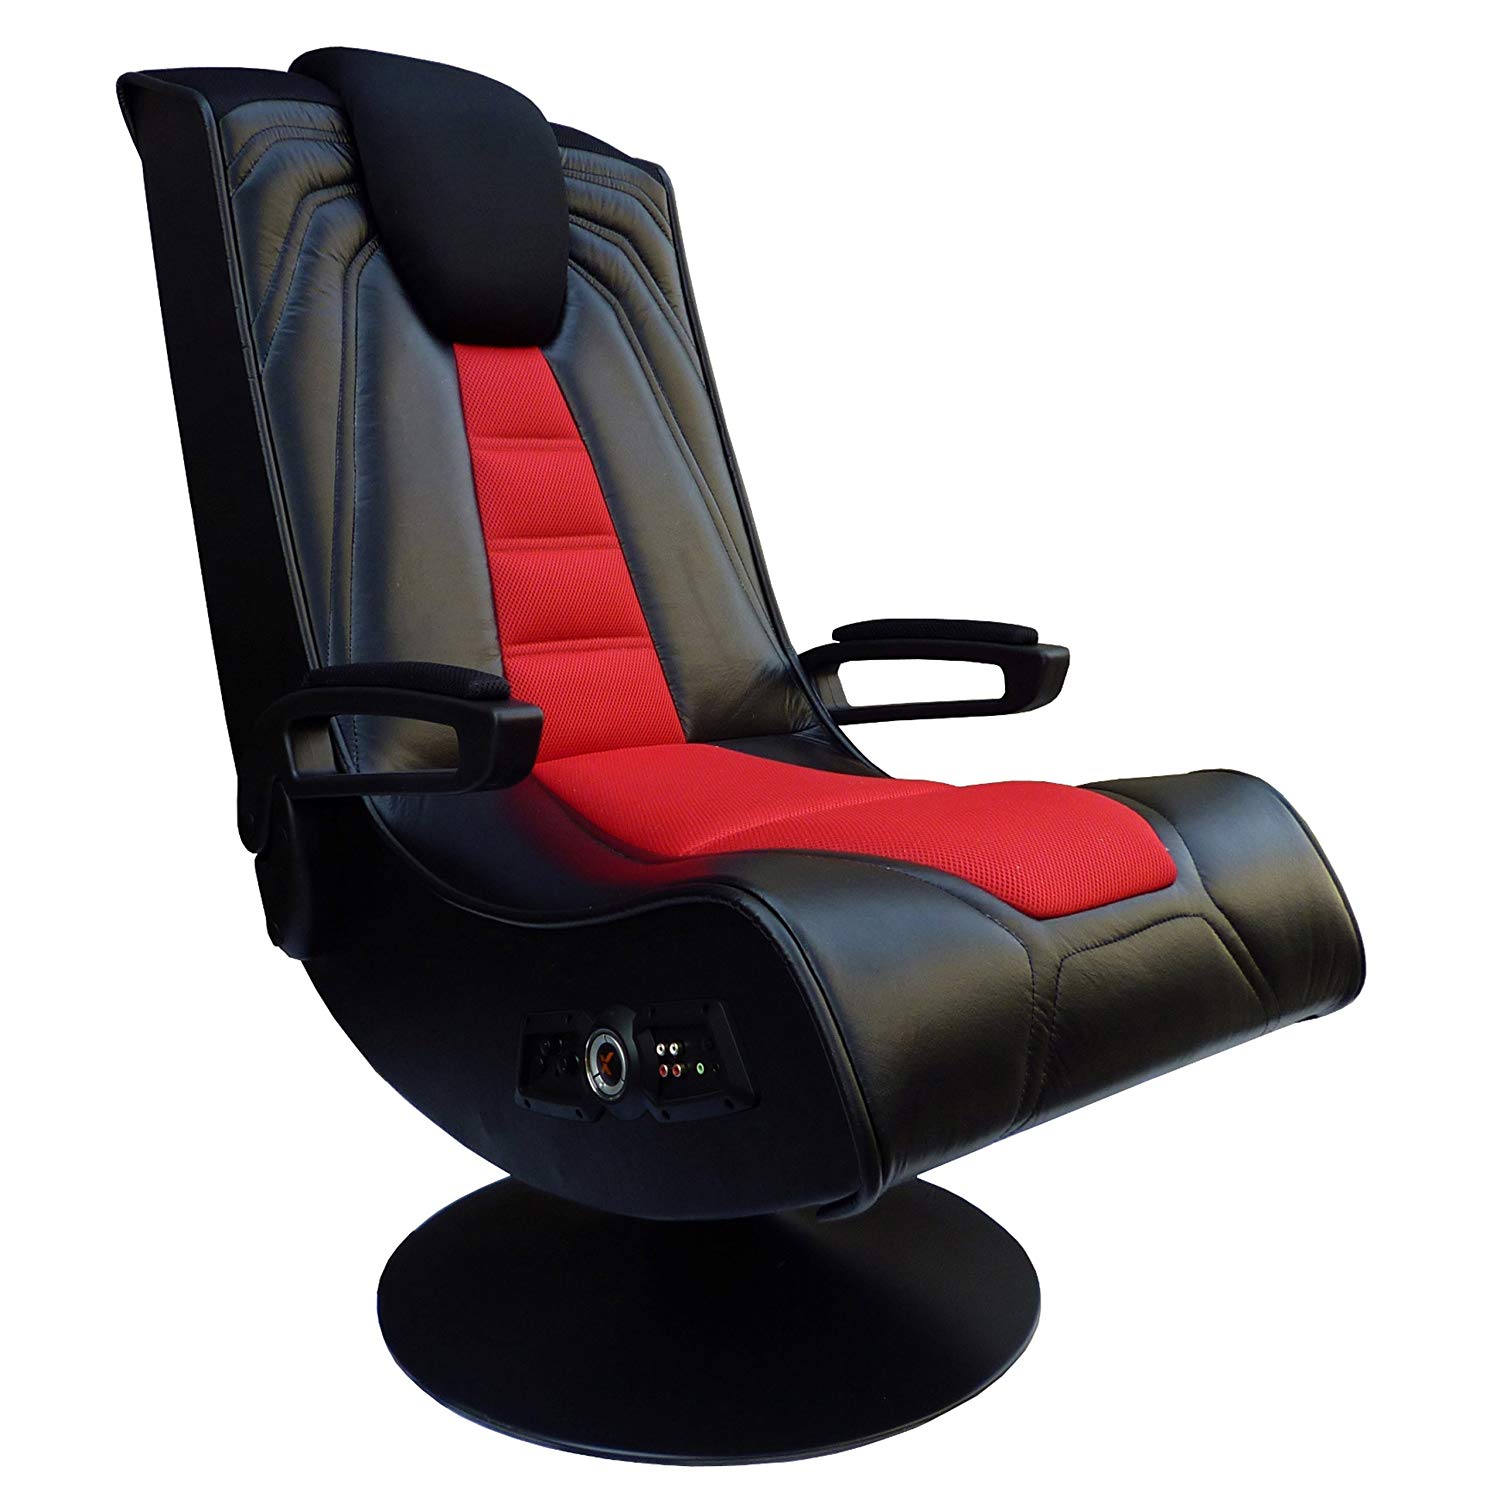 Game chairs amazon.com: x Rocker 51092 Spider 2.1 gaming chair wireless with vibration: XOCZJFR